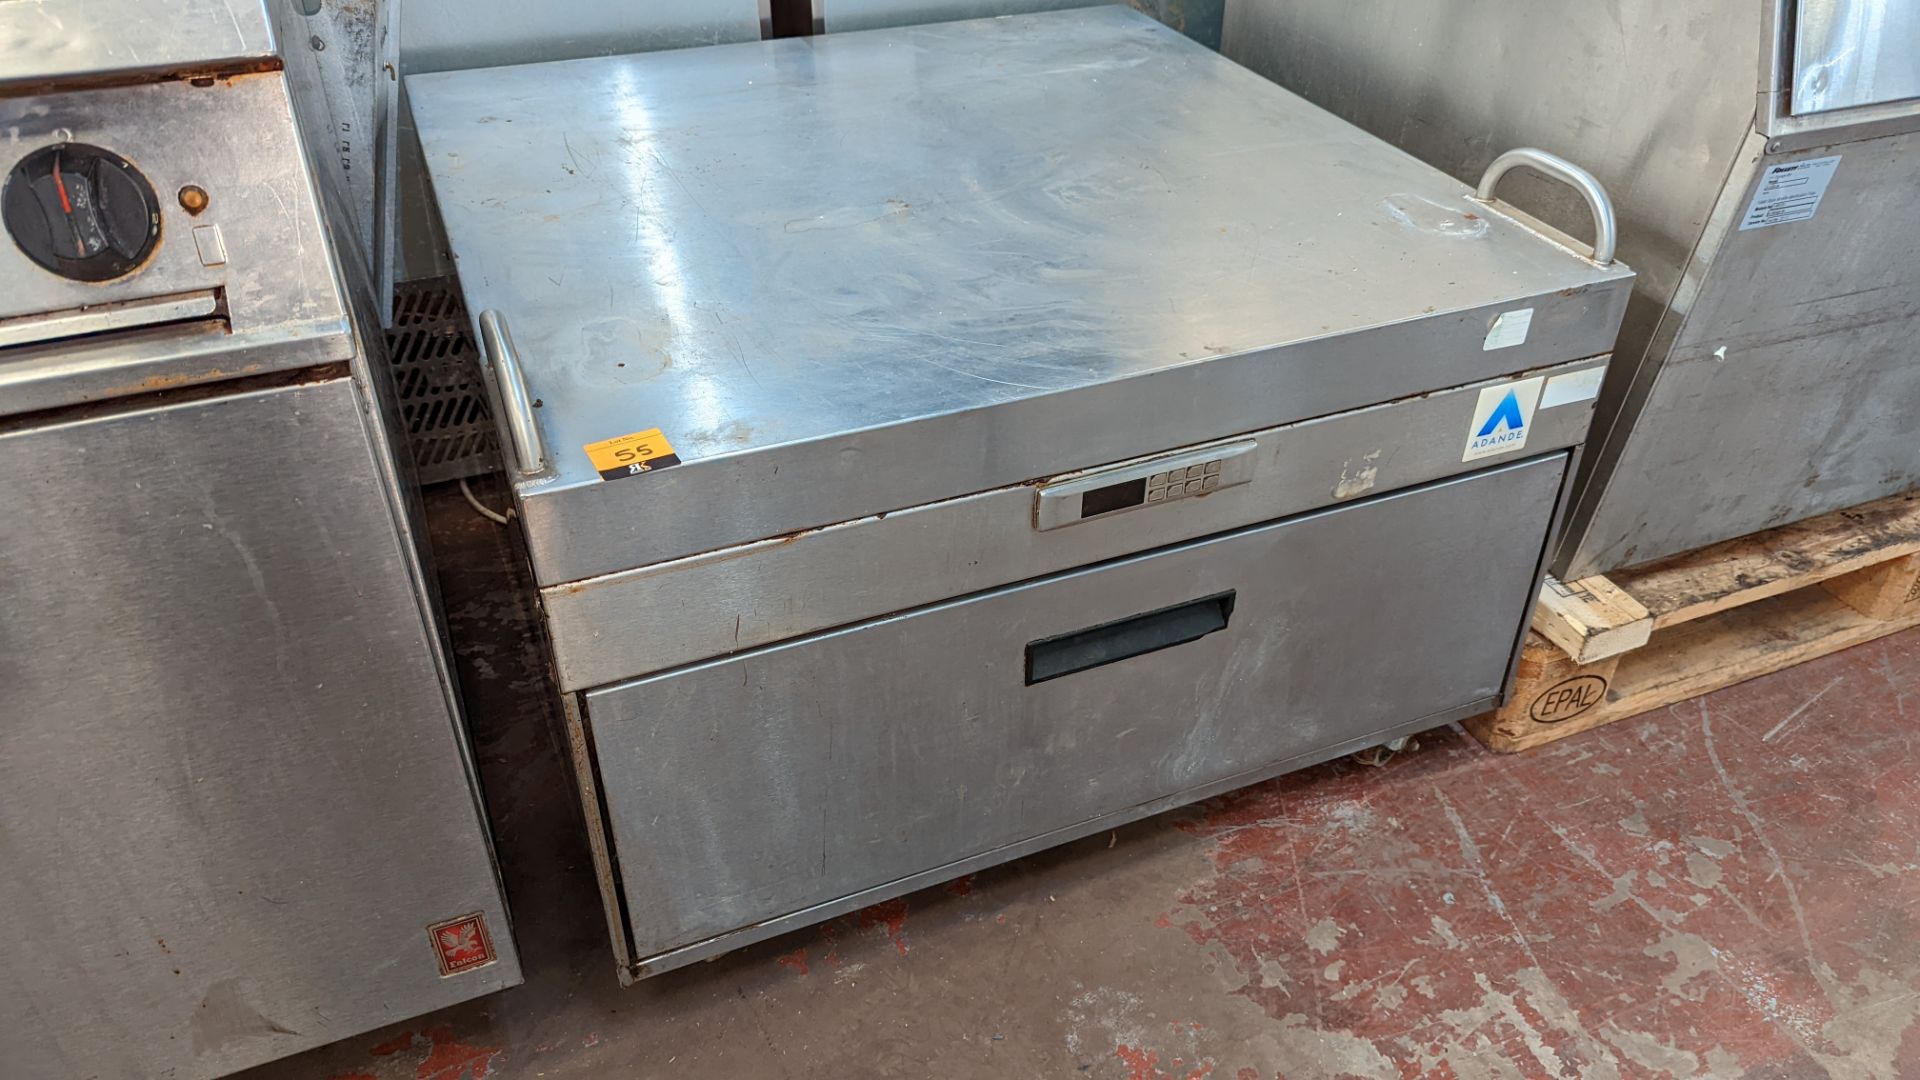 Stainless steel low height mobile refrigerated unit - Image 2 of 6